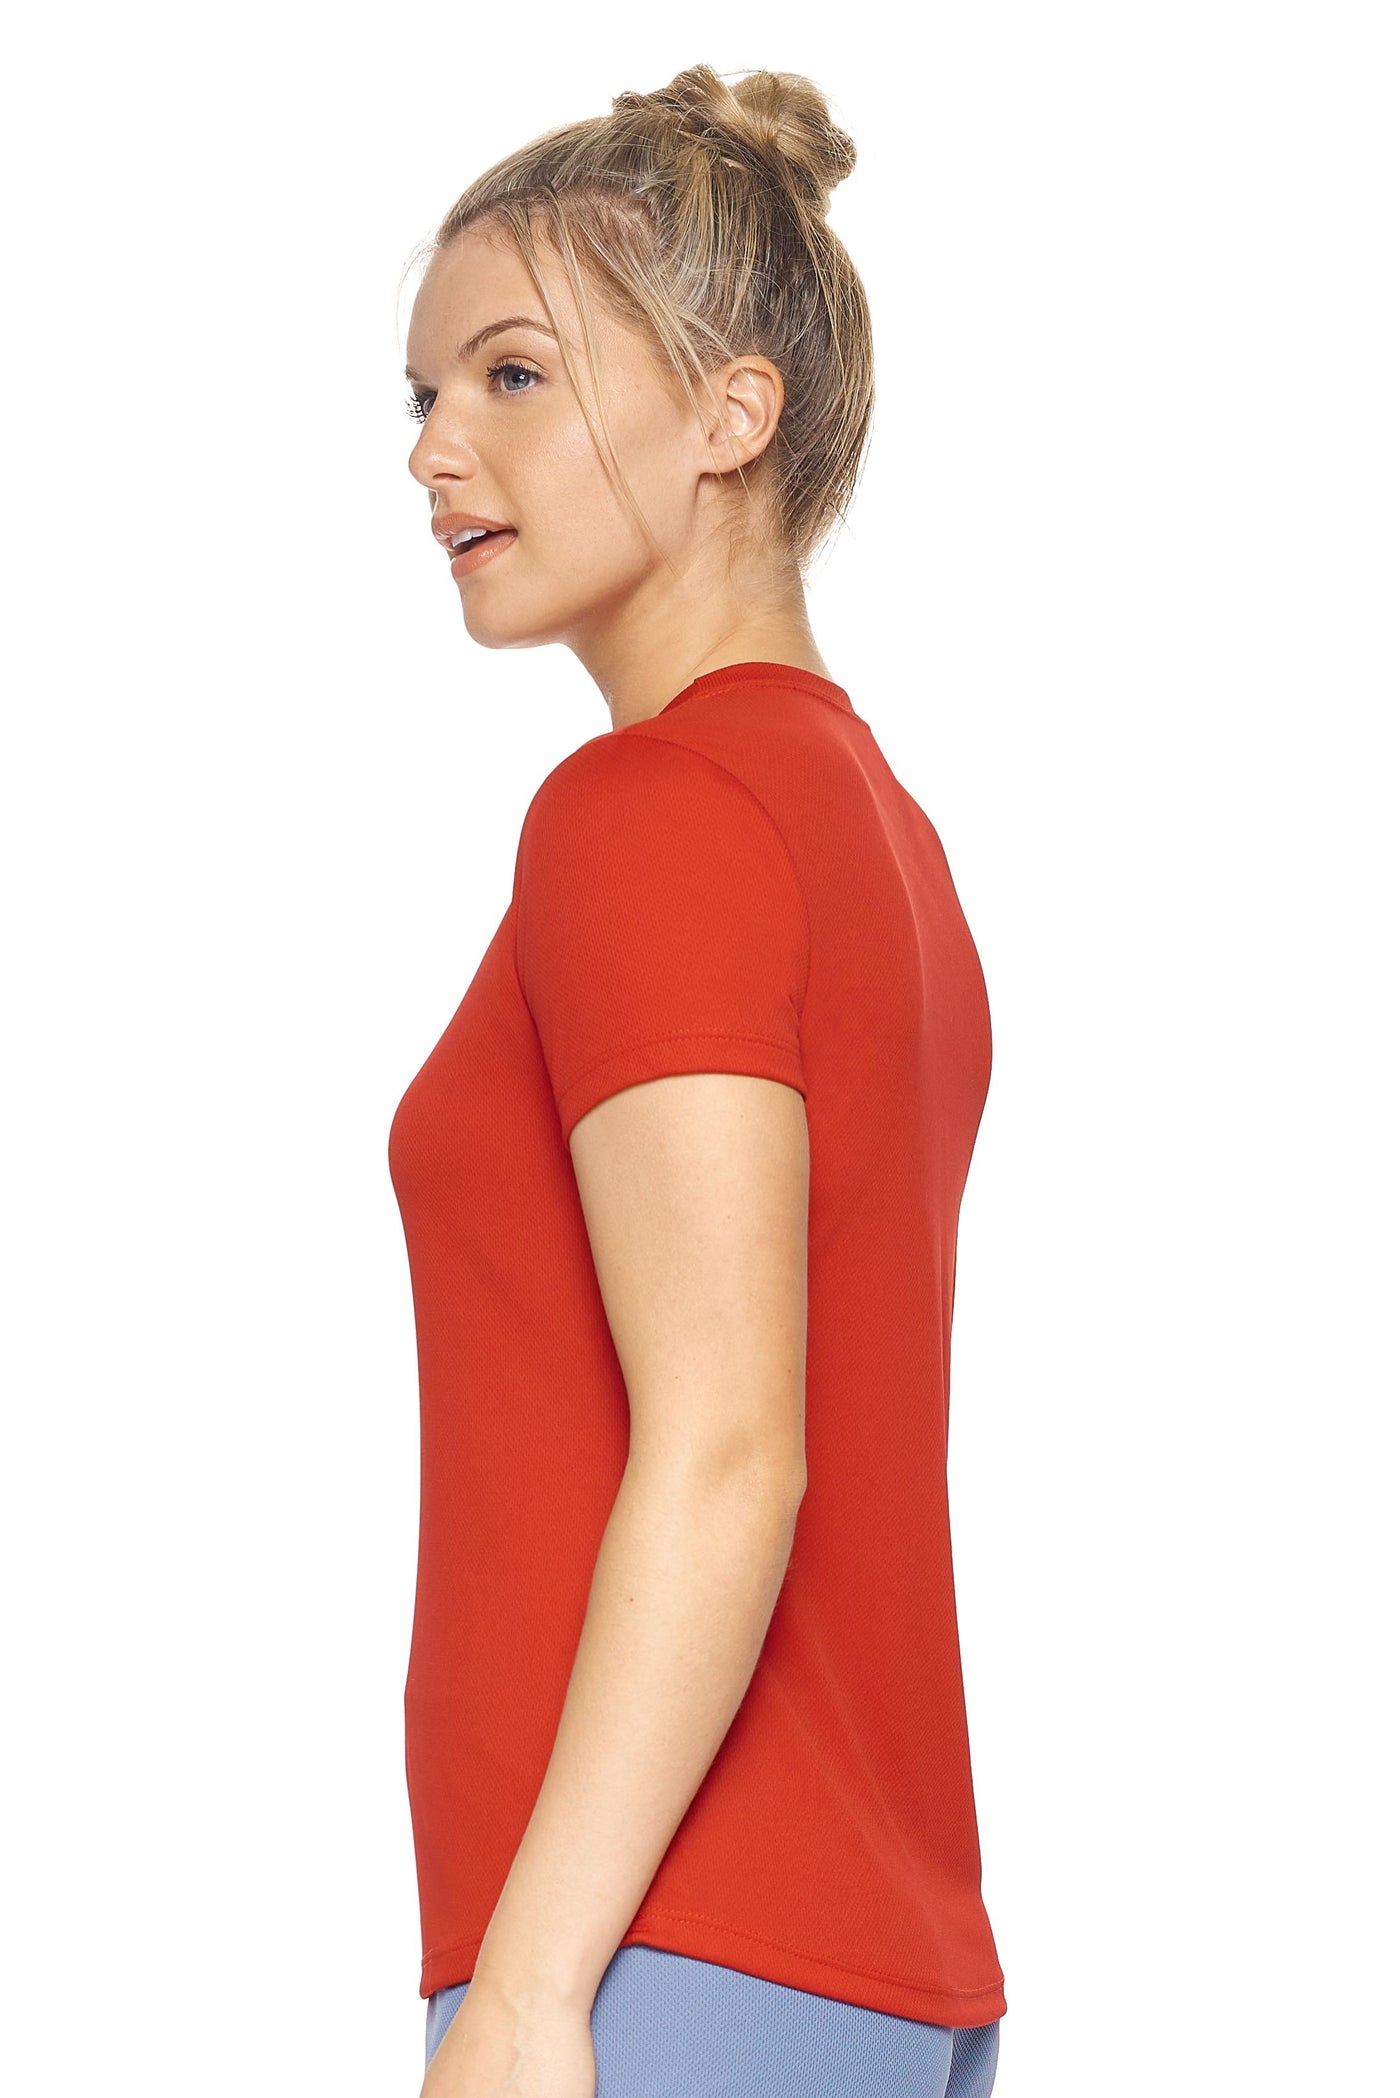 Expert Brand Retail Women's Activewear Sportswear Oxymesh Tec Tee T-shirt Made in USA red 2#color_red